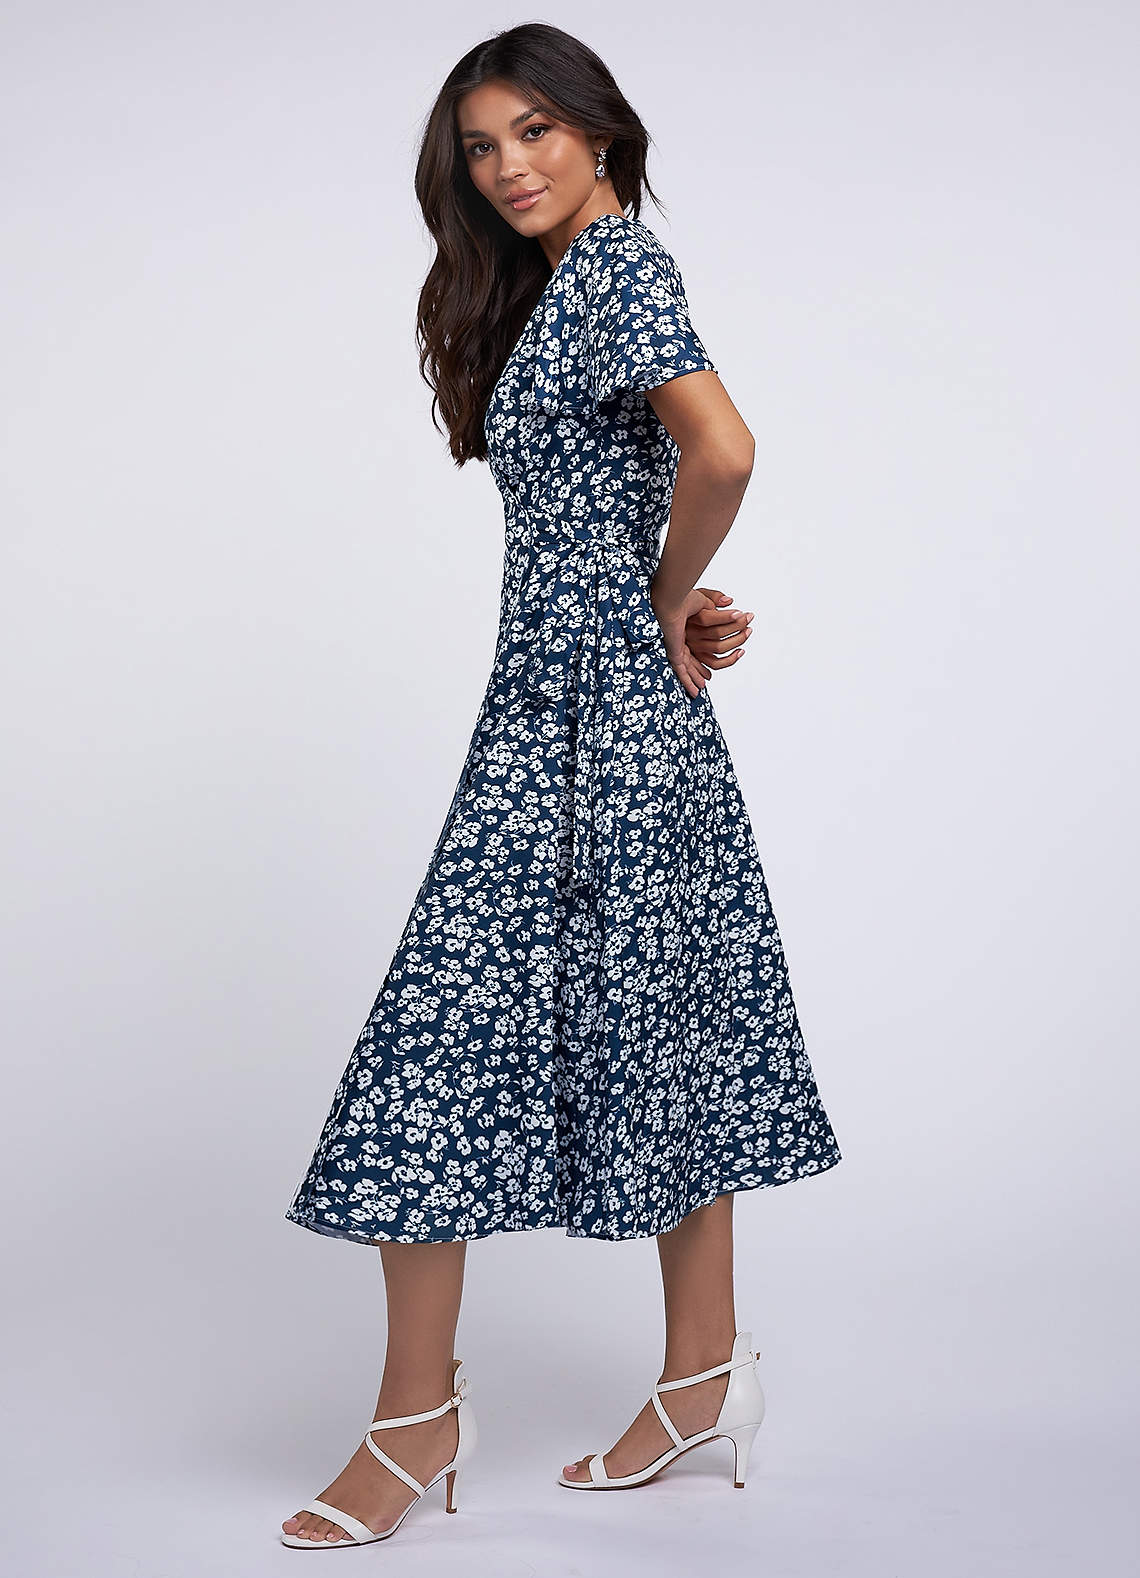 Express Yourself Navy Blue Floral Print Wrap Dress image1